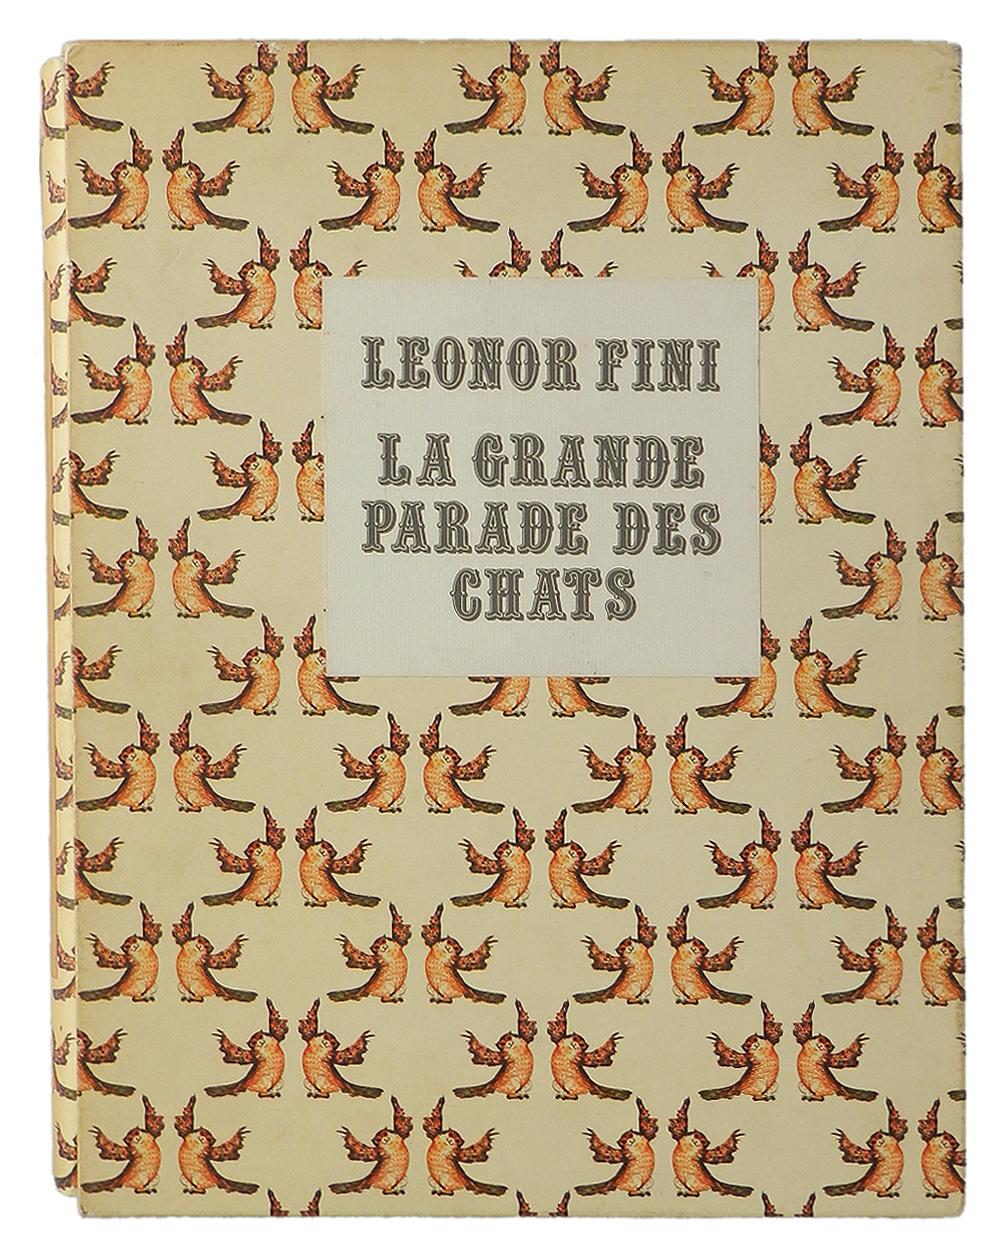 La grande Parade des Chats Original Illustrations by Leonor Fini
Containing sixty illustrations 
This is from a unique special run being one of only 35 copies produced for personal use by Leonor Fini these were numbered EA 1 to EA 35
This example